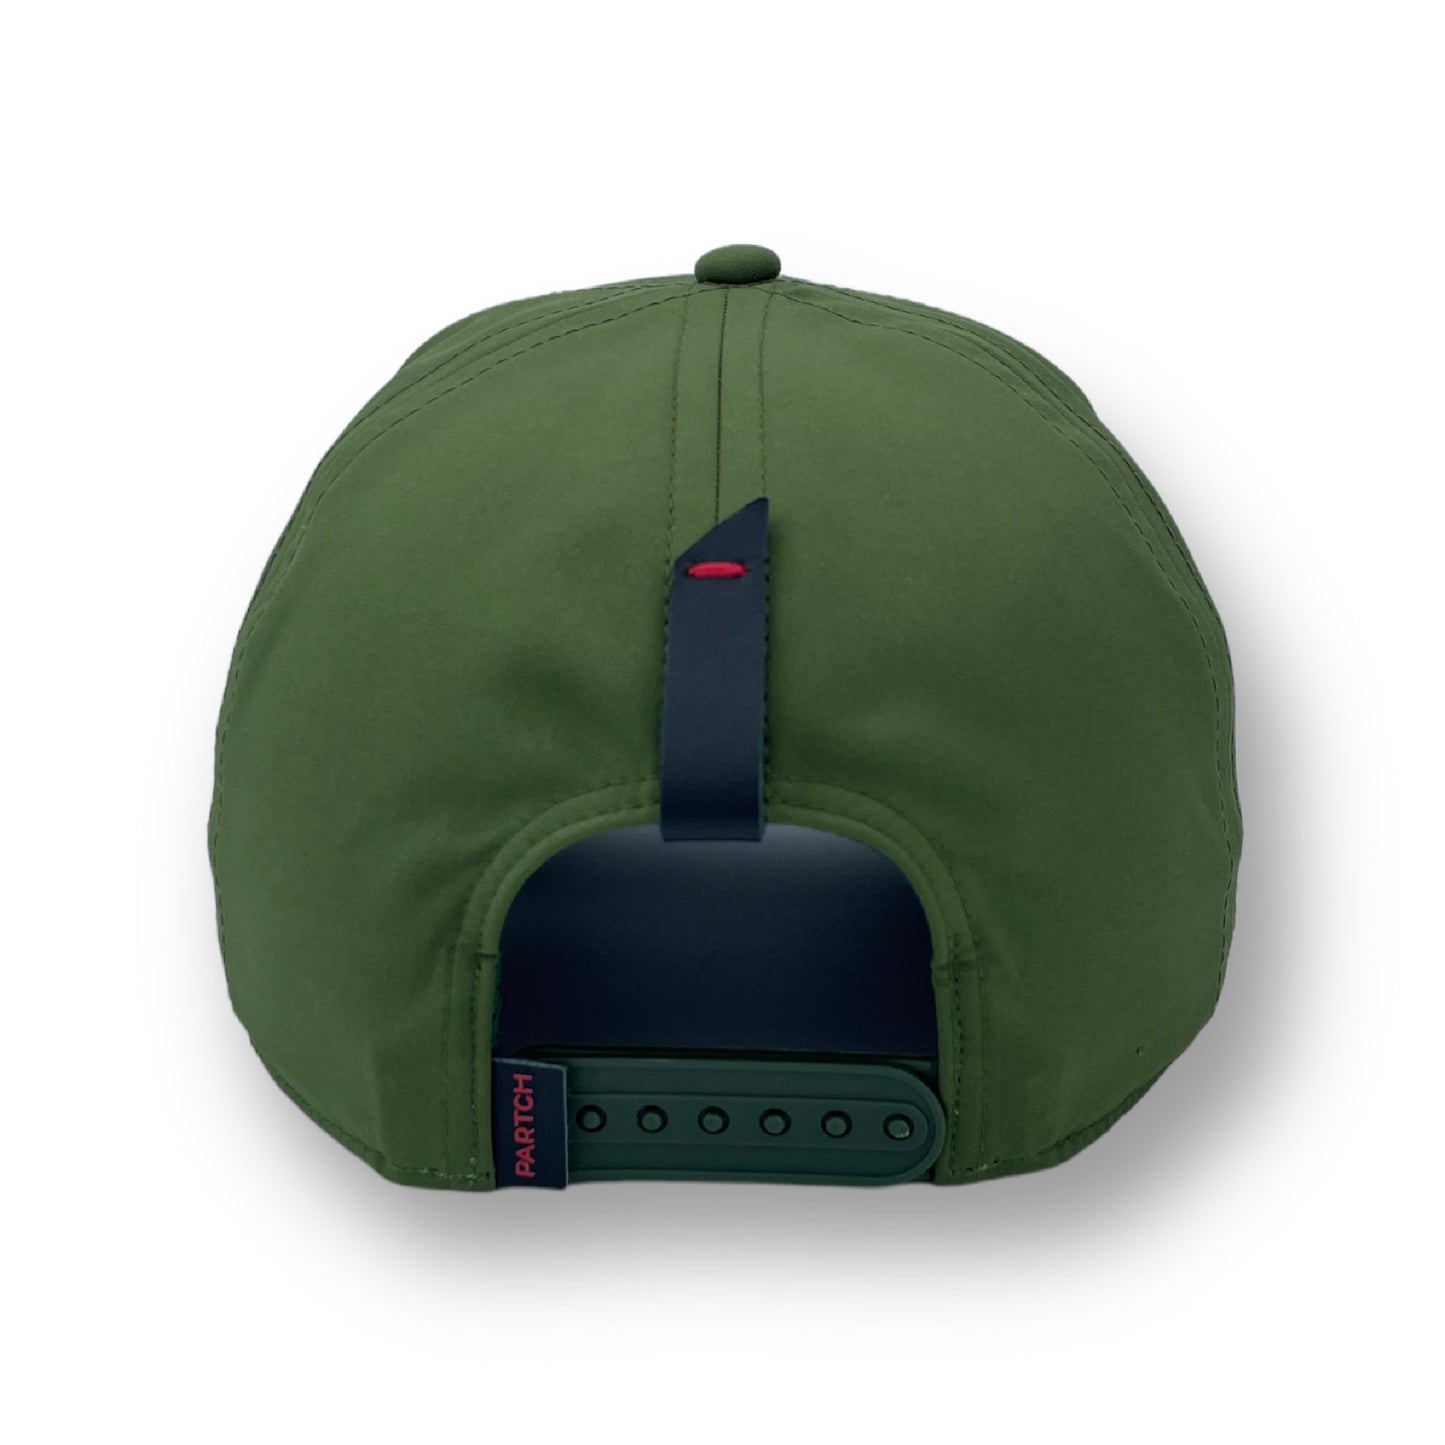 Trucker hat green full fabric in Spandex and leather accents